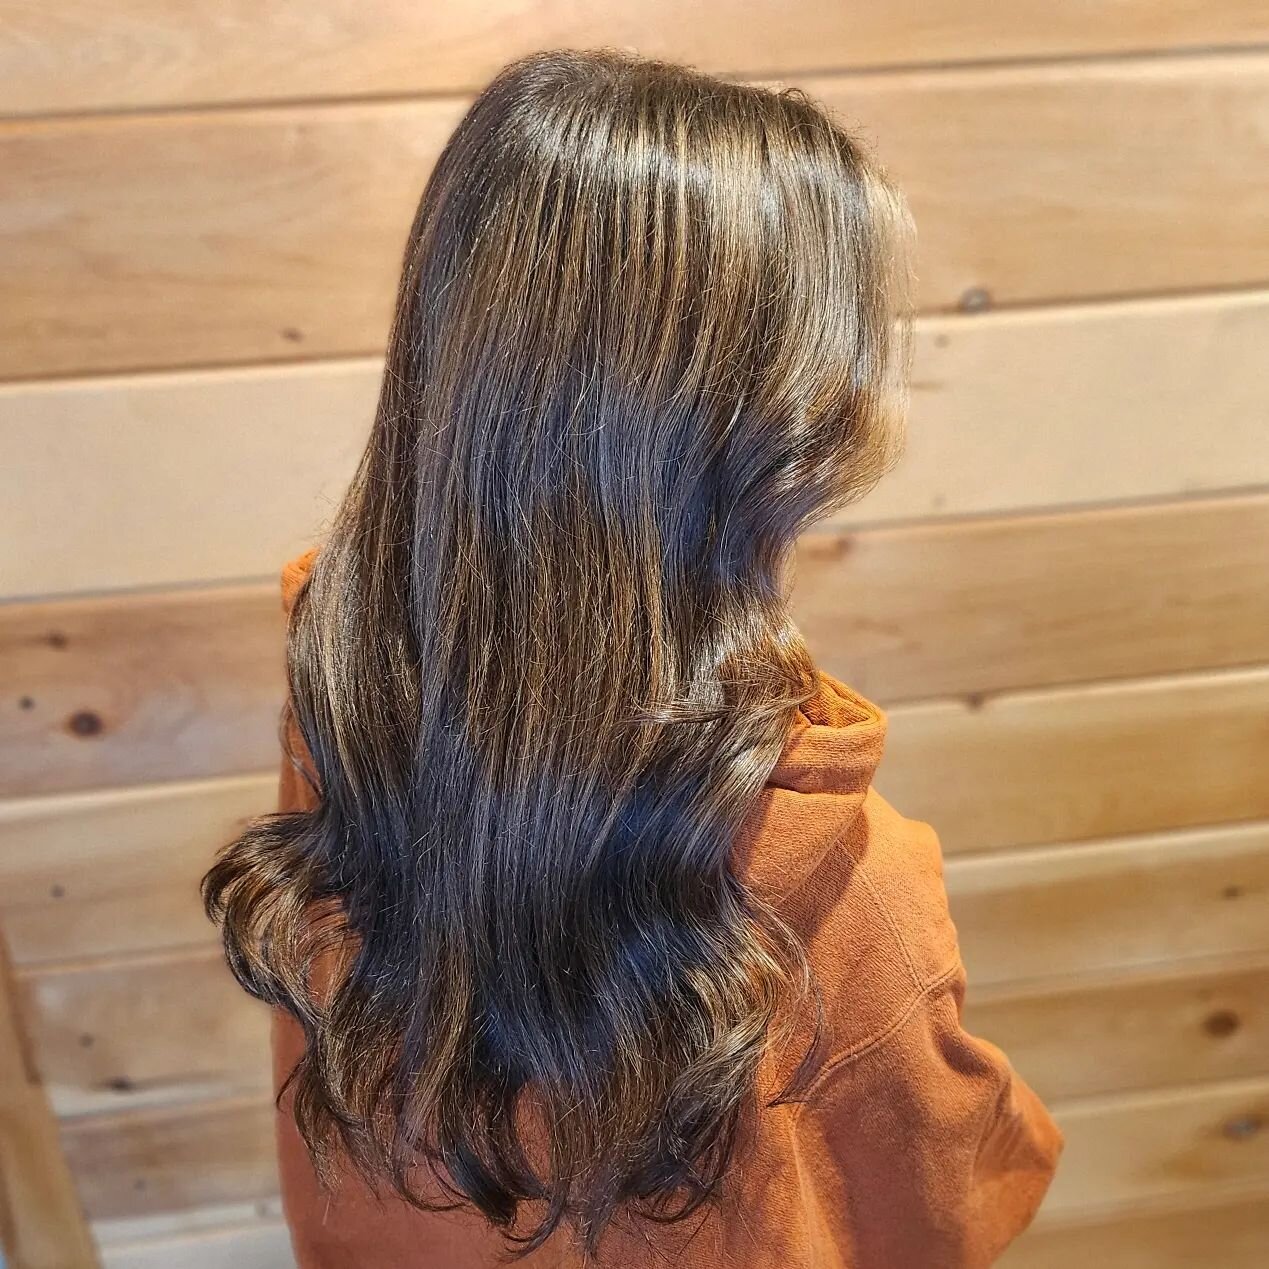 Dark Chocolate Salted Caramel 🍫🍪
@hairbycoreendawn
Partial Teasy light on these long locks, and partial highlight on the shoulder length hair ❤️
#1 salon after photo
#2 processing selfie 
#3 client after selfie 😍
#chocolatecaramelhair #teasylights